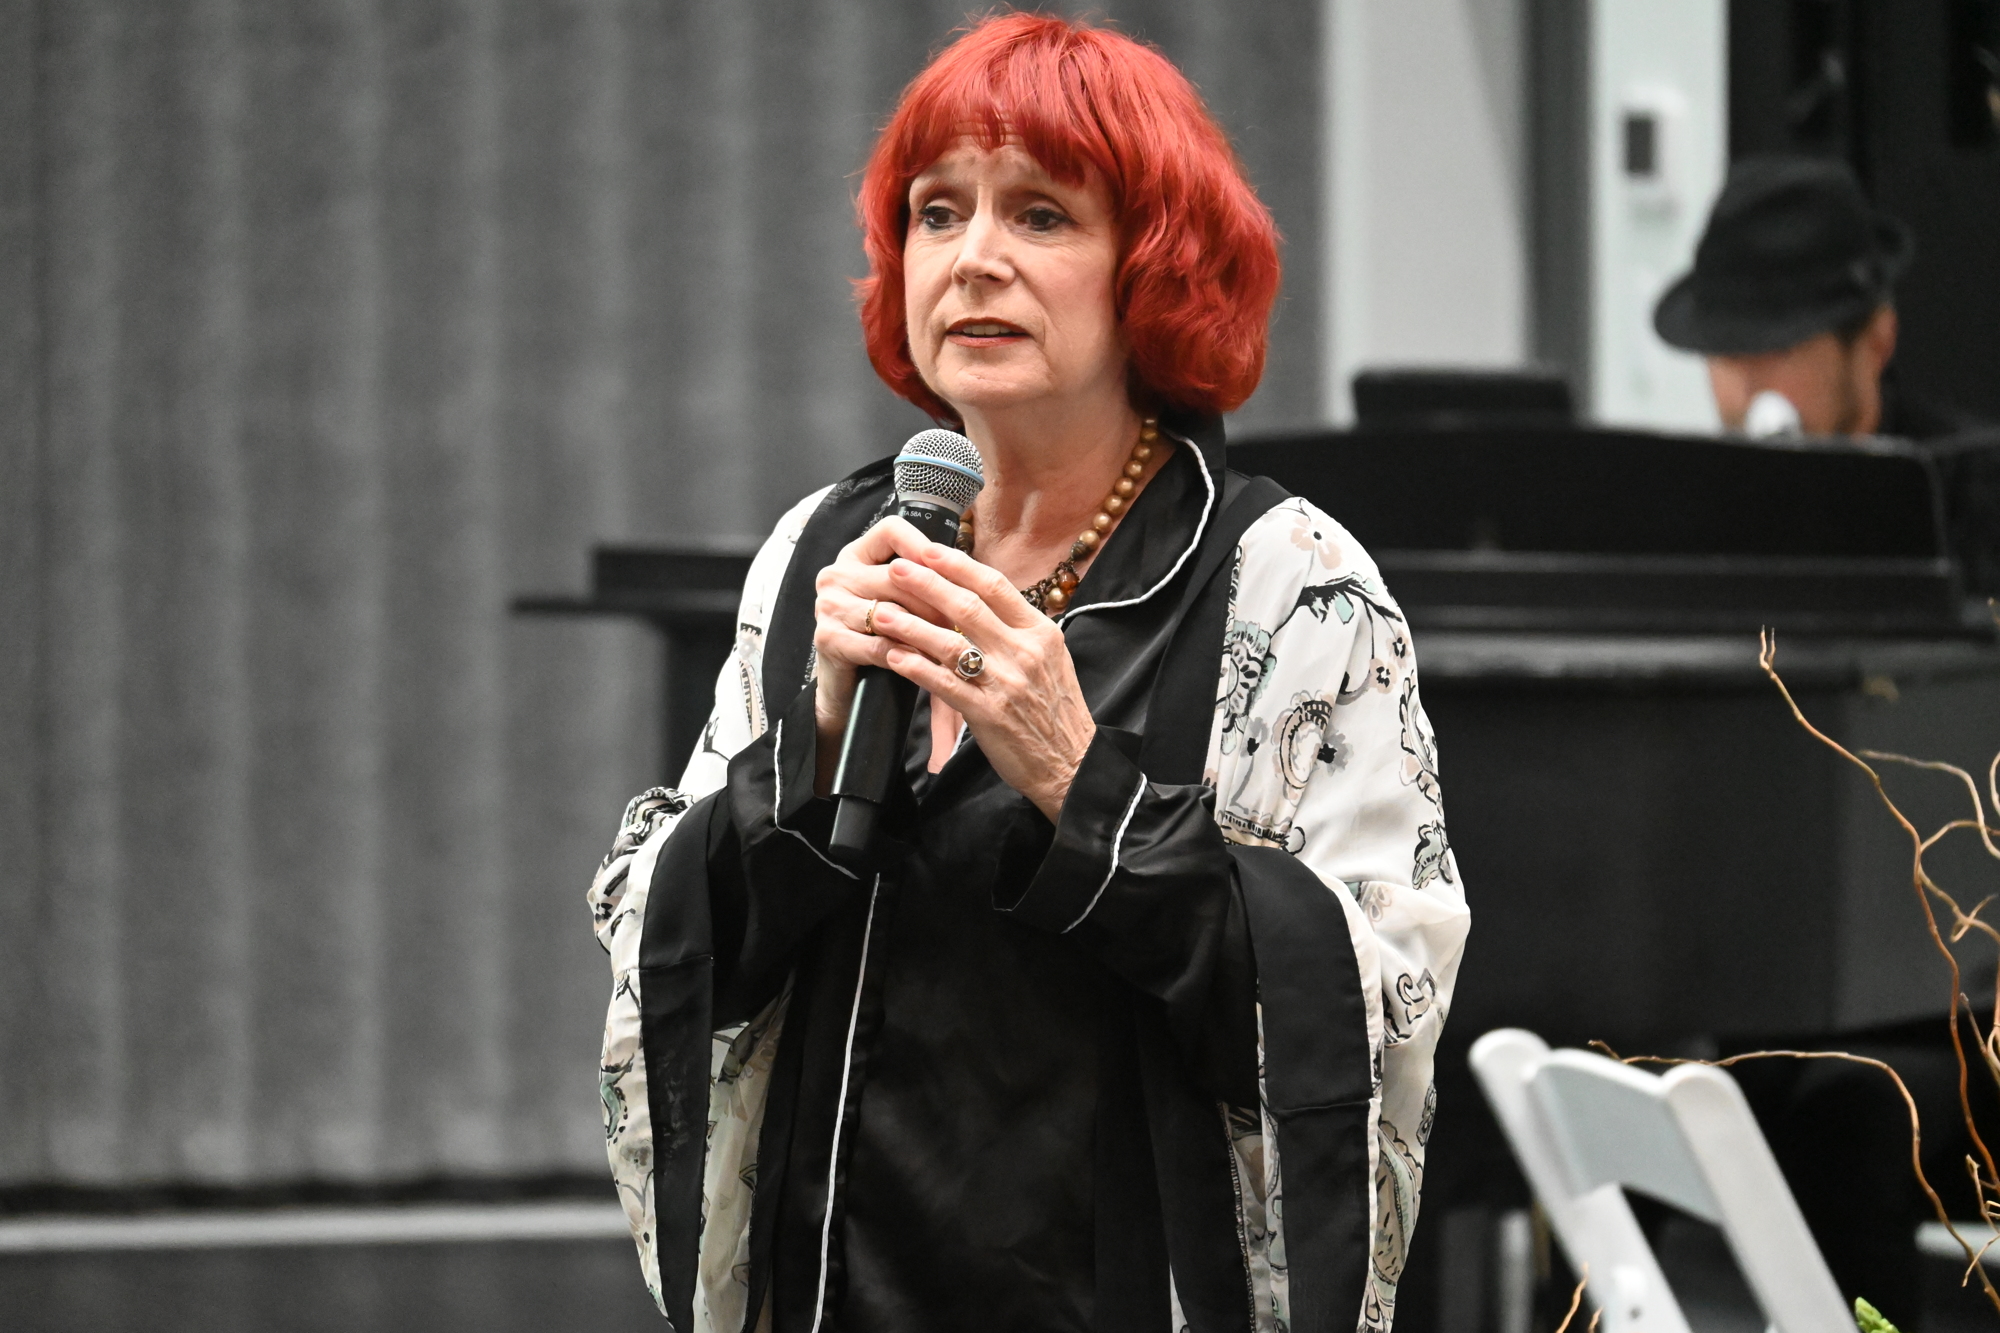 Ann Morrison, pictured earlier this year at an Asolo Rep event, is ready to bring her one-woman show to the stage at Studio 1130.(Photo by Spencer Fordin)